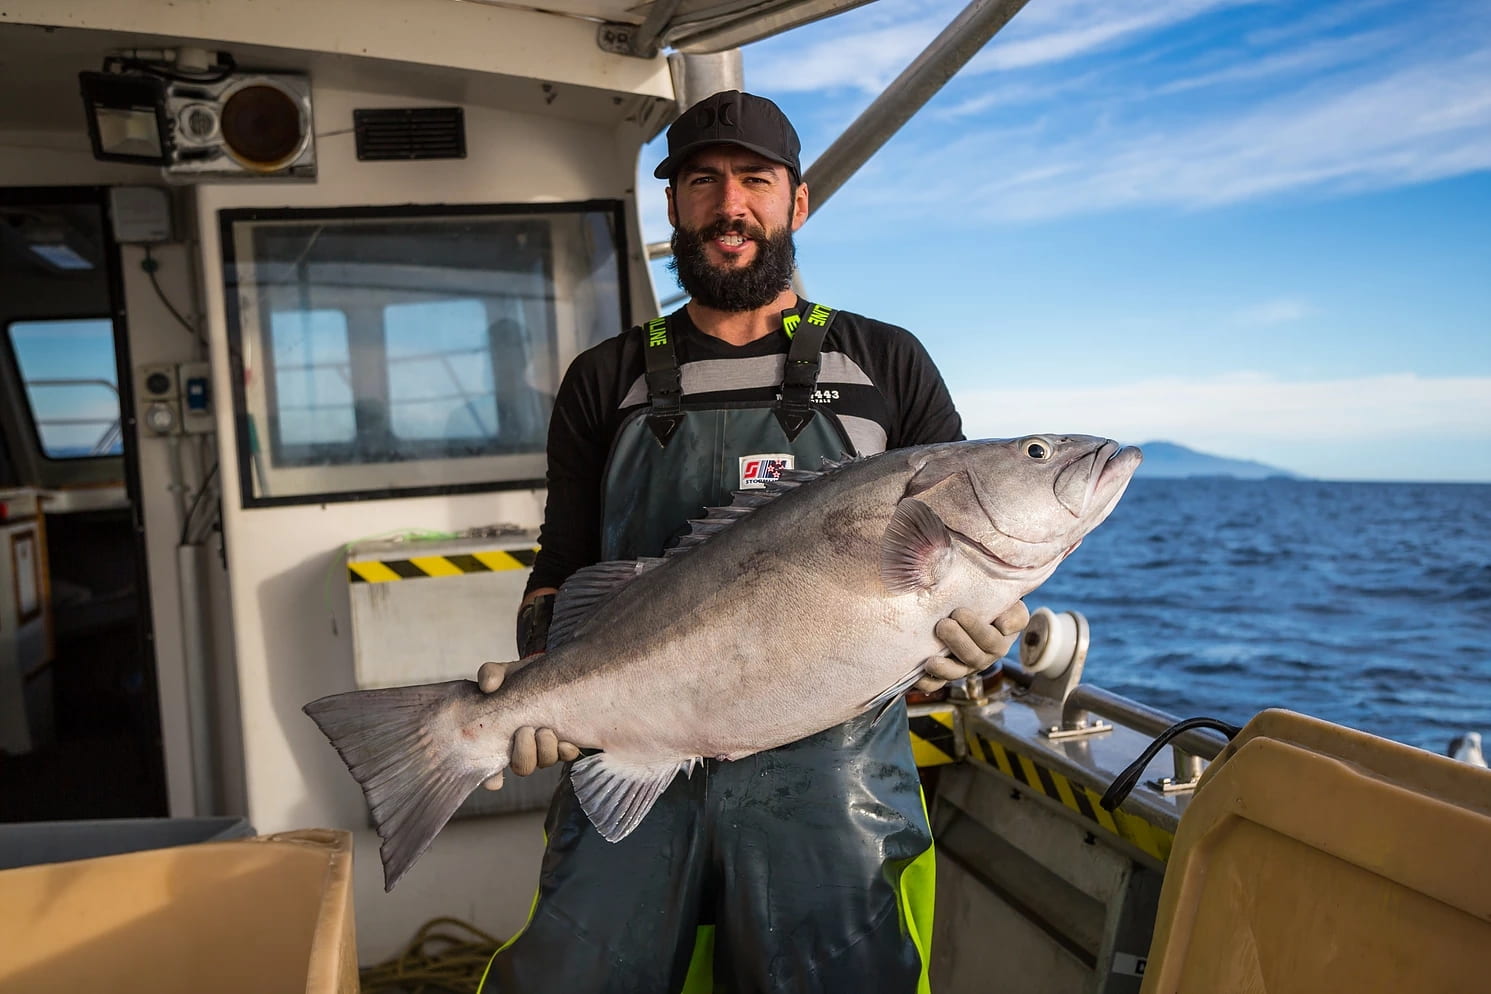 A smiling man with a beard and a cap stands on the deck of a fishing vessel, holding a large silver-grey fish